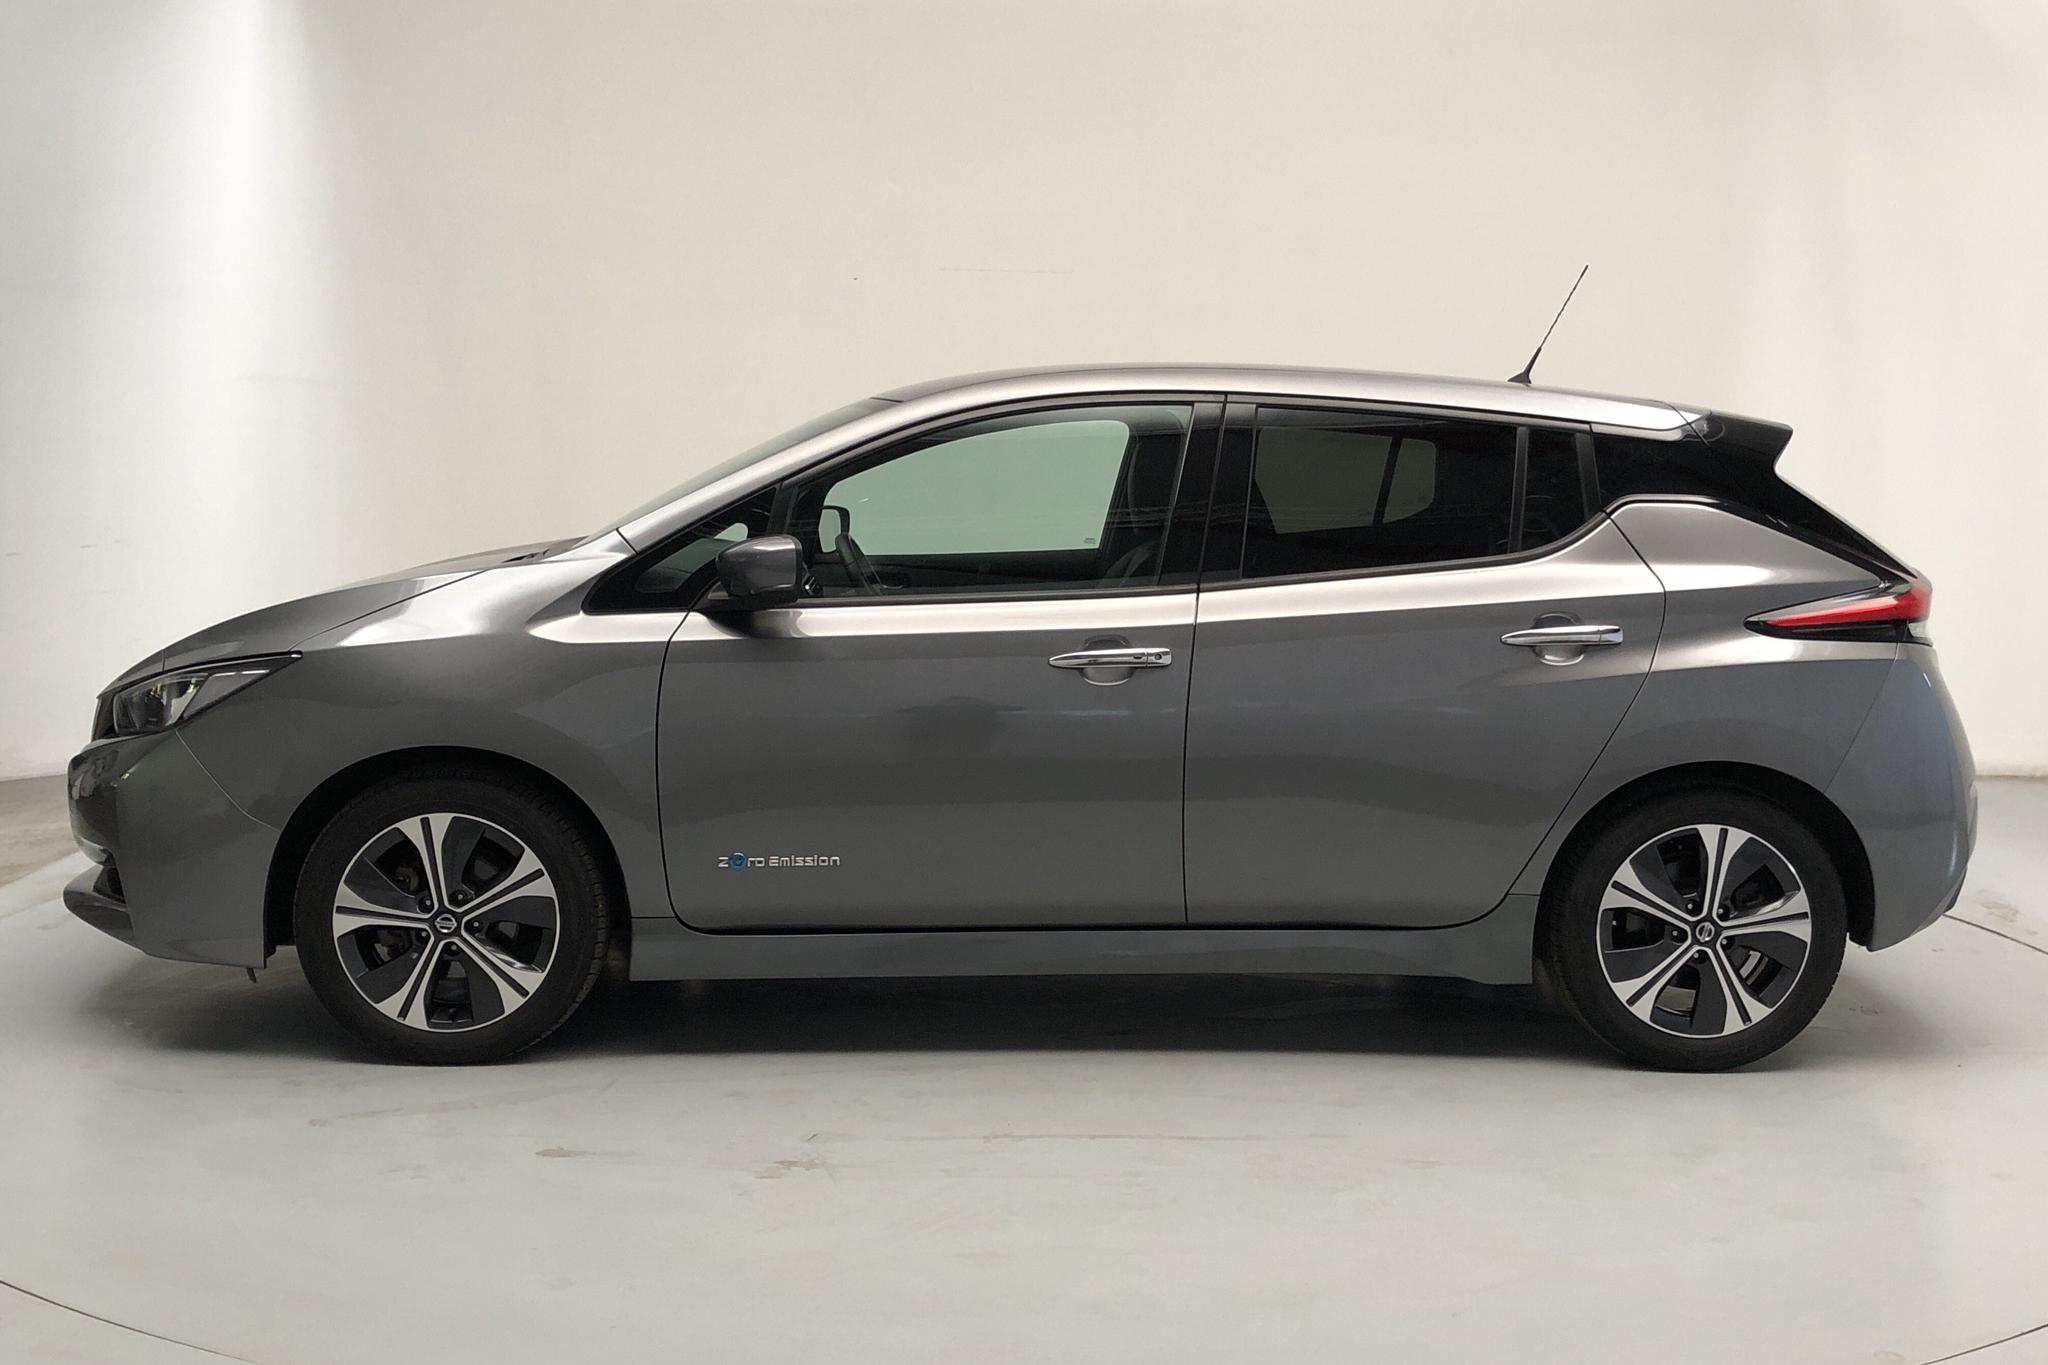 Nissan LEAF 5dr 40 kWh (150hk) - 35 970 km - Automatic - gray - 2019